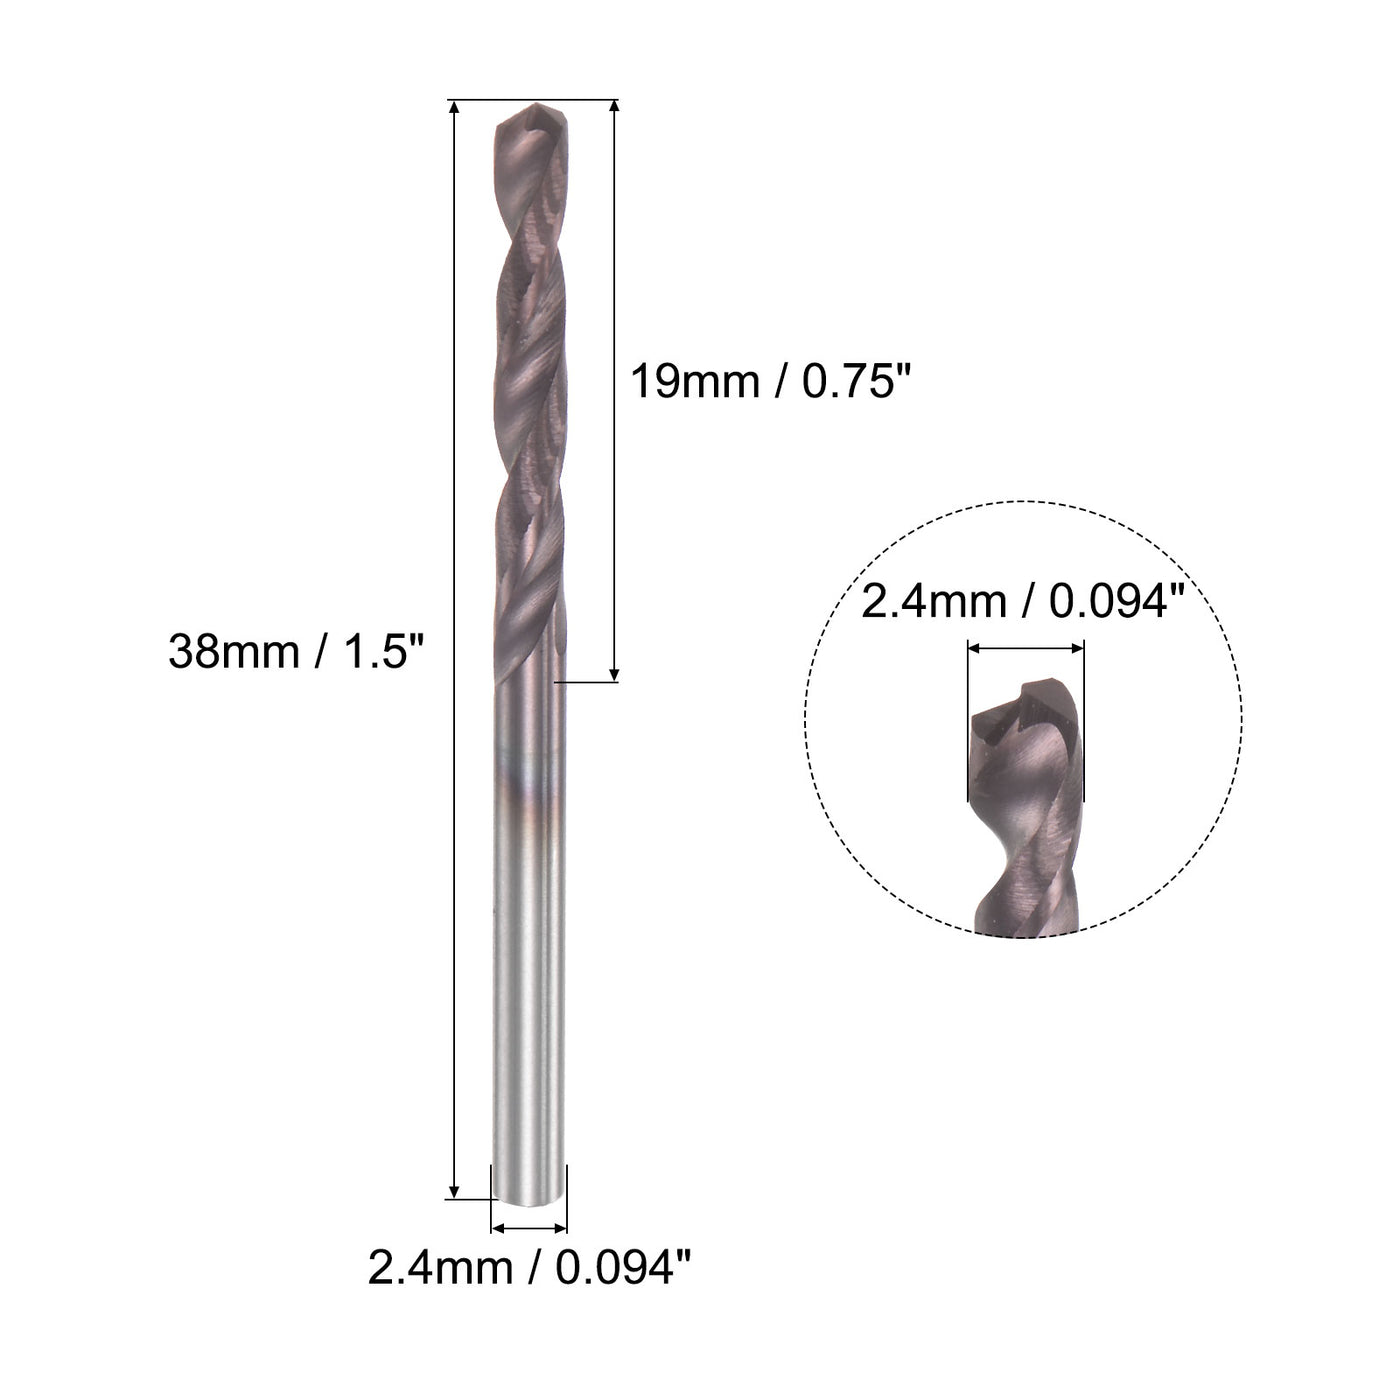 uxcell Uxcell 2.4mm DIN K45 Tungsten Carbide AlTiSin Coated Drill Bit for Stainless Steel